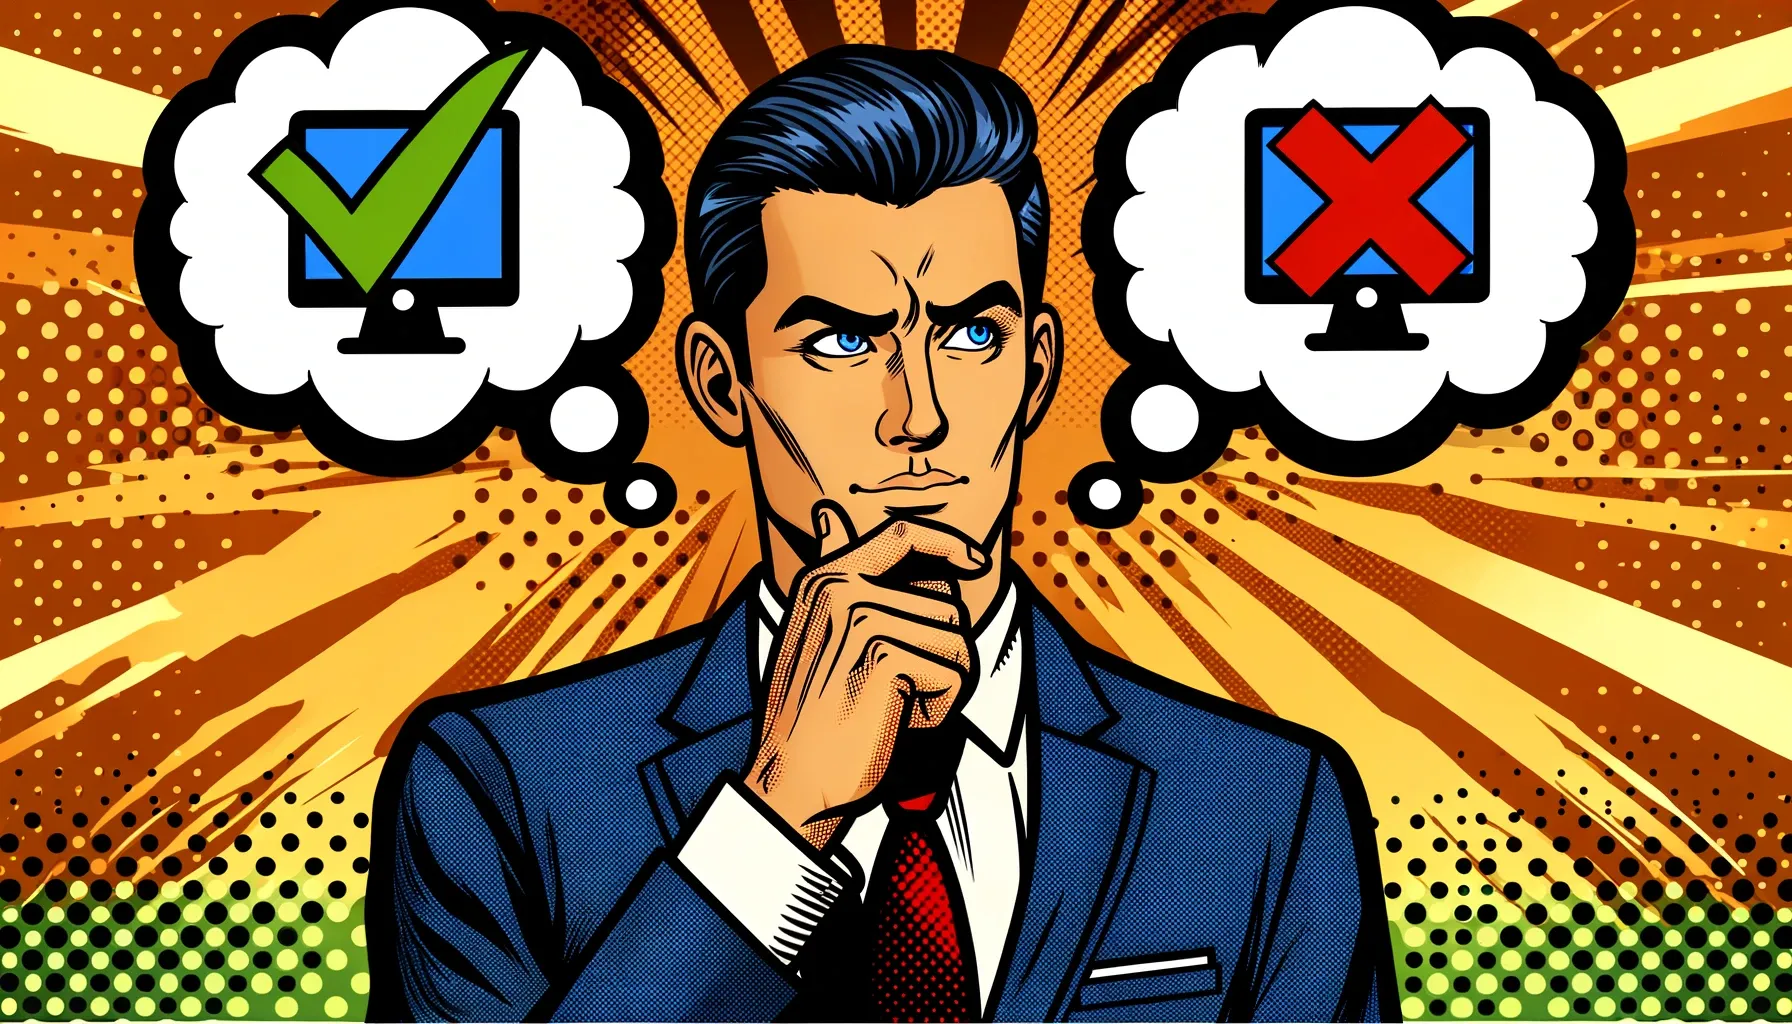 A man in a suit with a thoughtful expression, contemplating between a computer monitor with a green checkmark and another with a red cross in a thought bubble, illustrated in a vibrant comic book style.